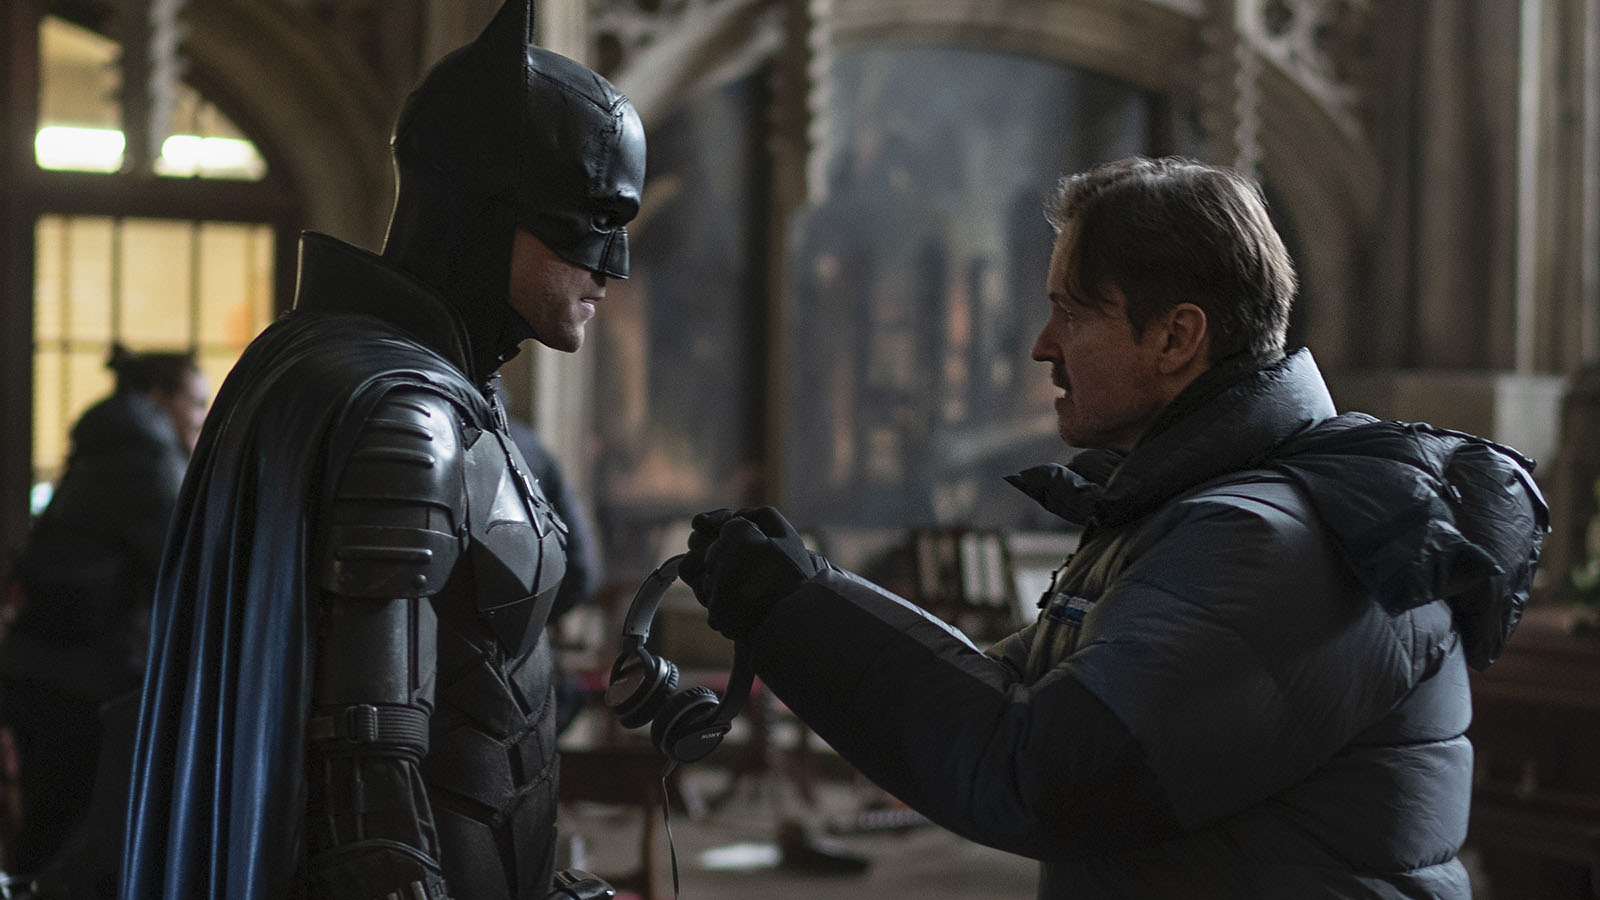 Director Matt Reeves offers direction on location for The Batman. Image © Warner Bros.